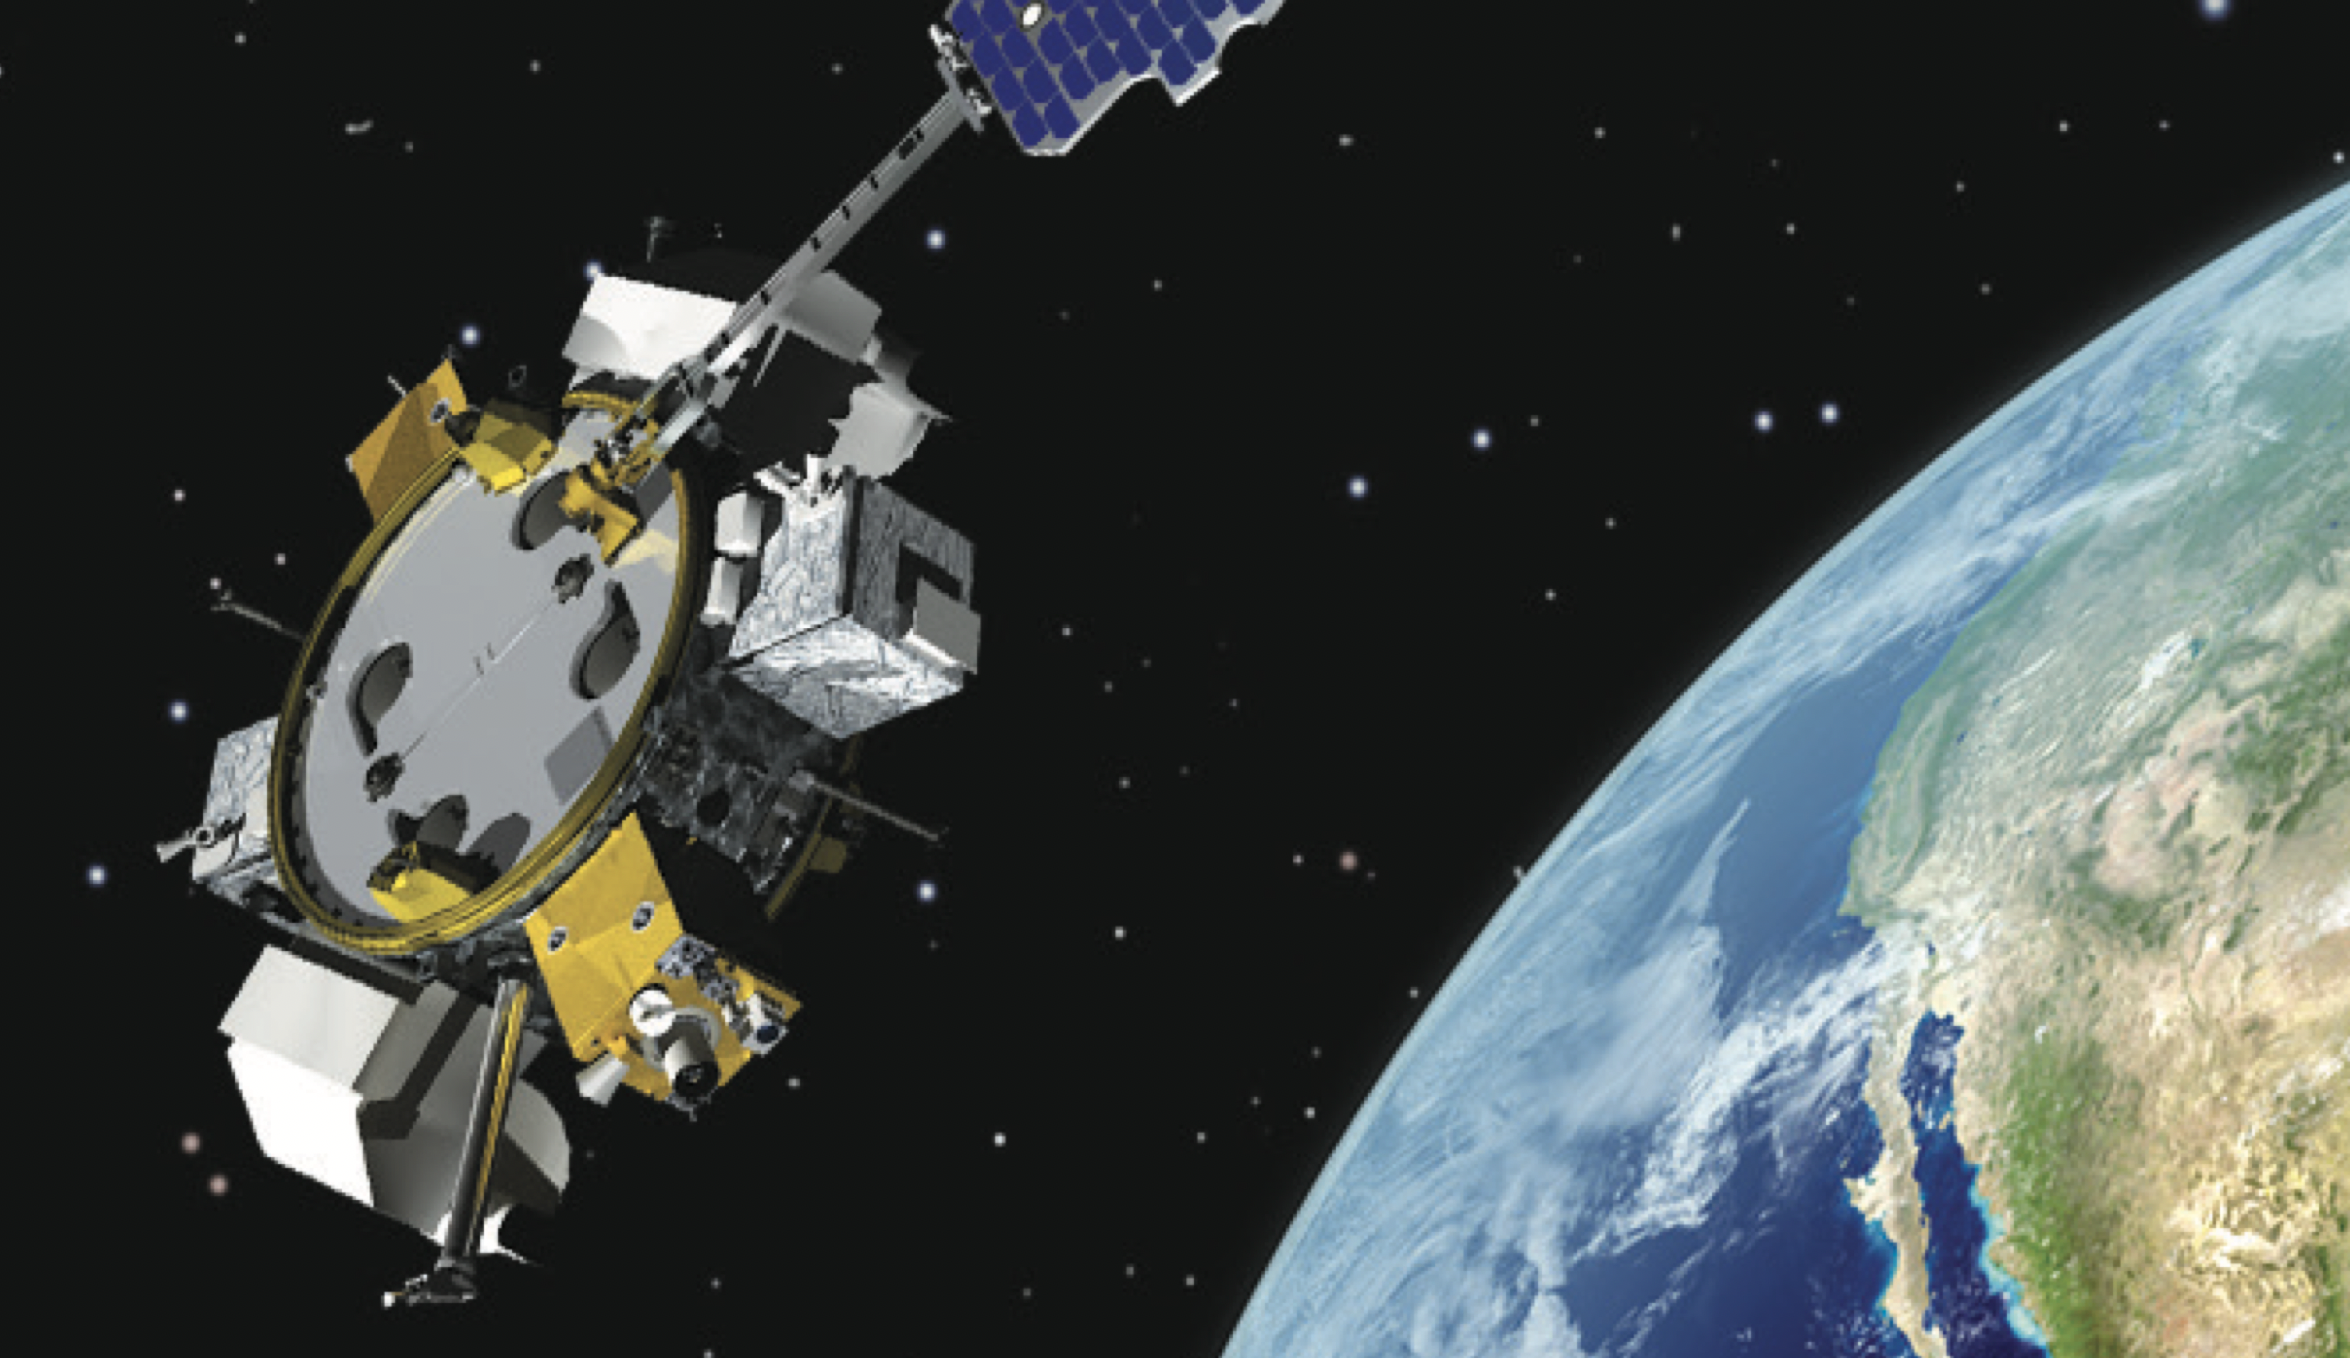 ESPA satellites maturing as the preferred ride for small national security payloads